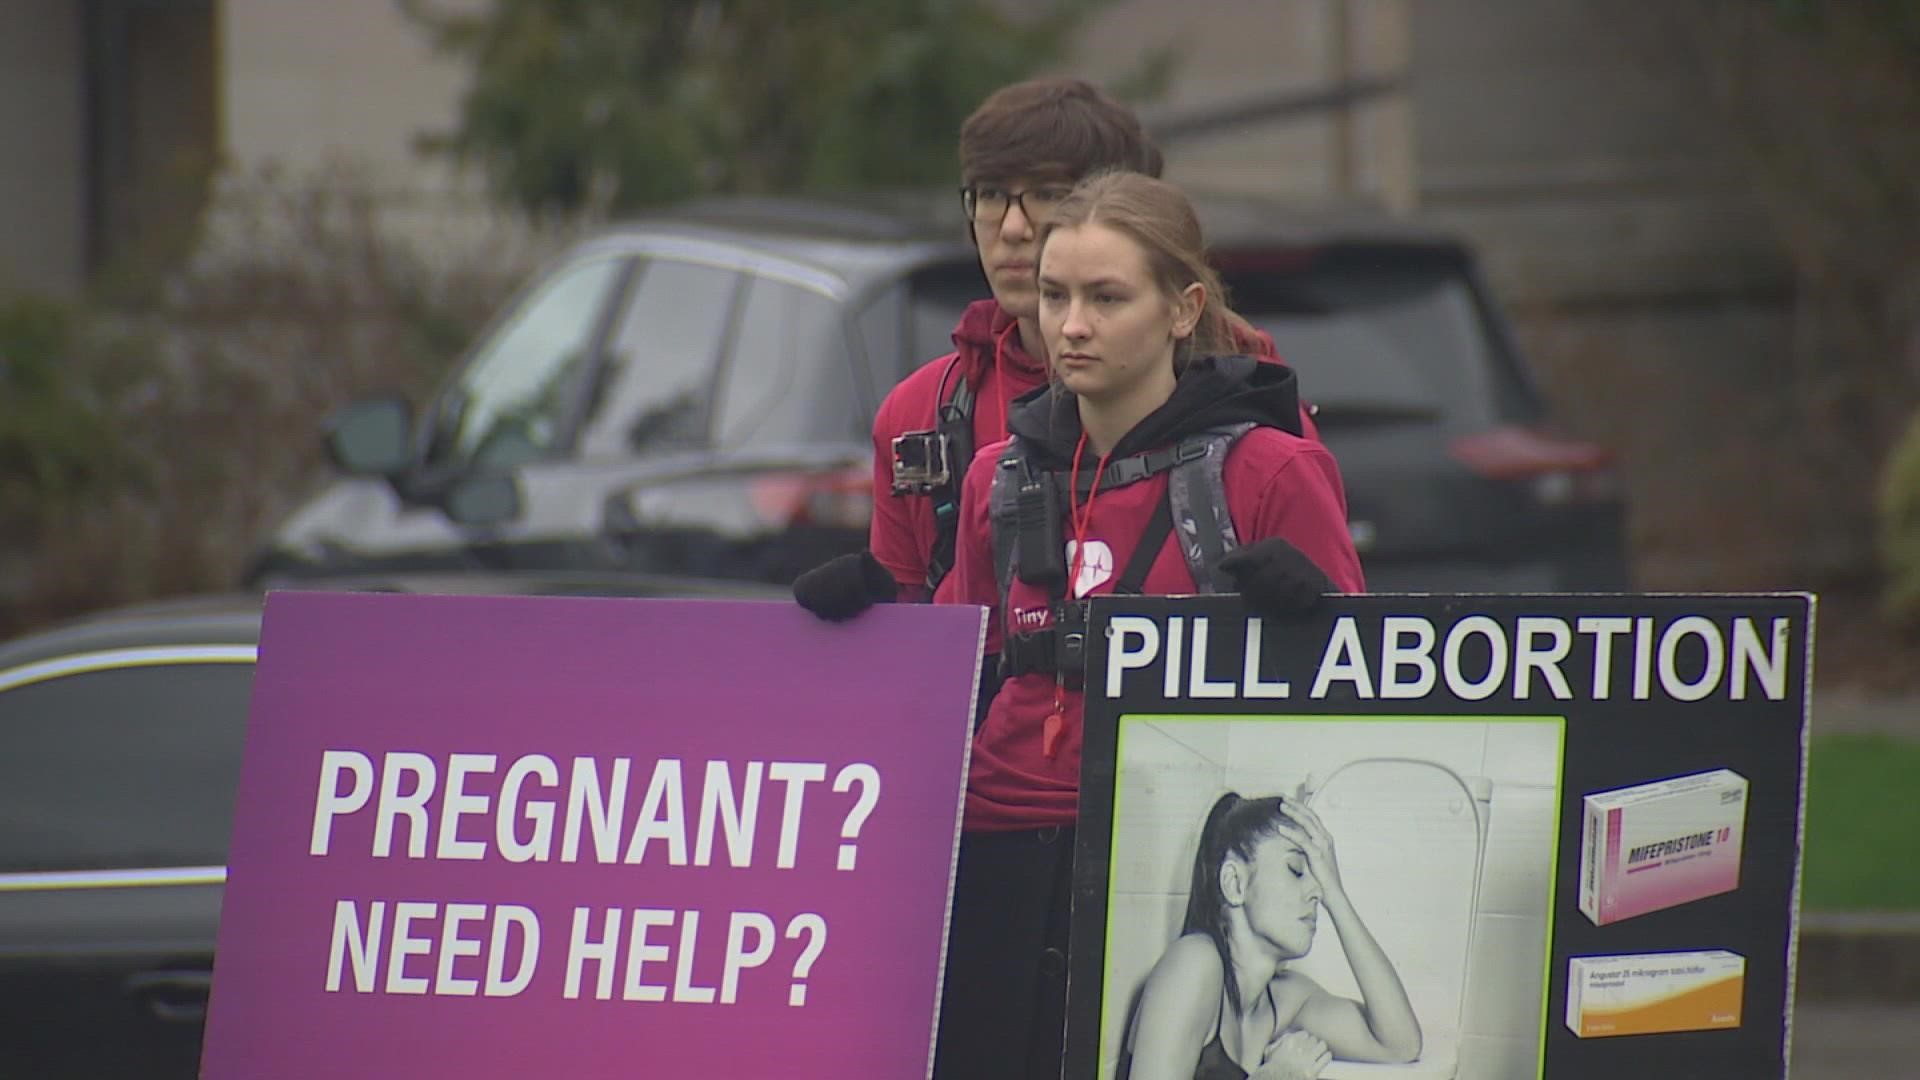 Proposed legislation aims to cement abortion as a right in the state of Washington, and ease costs surrounding the procedure.